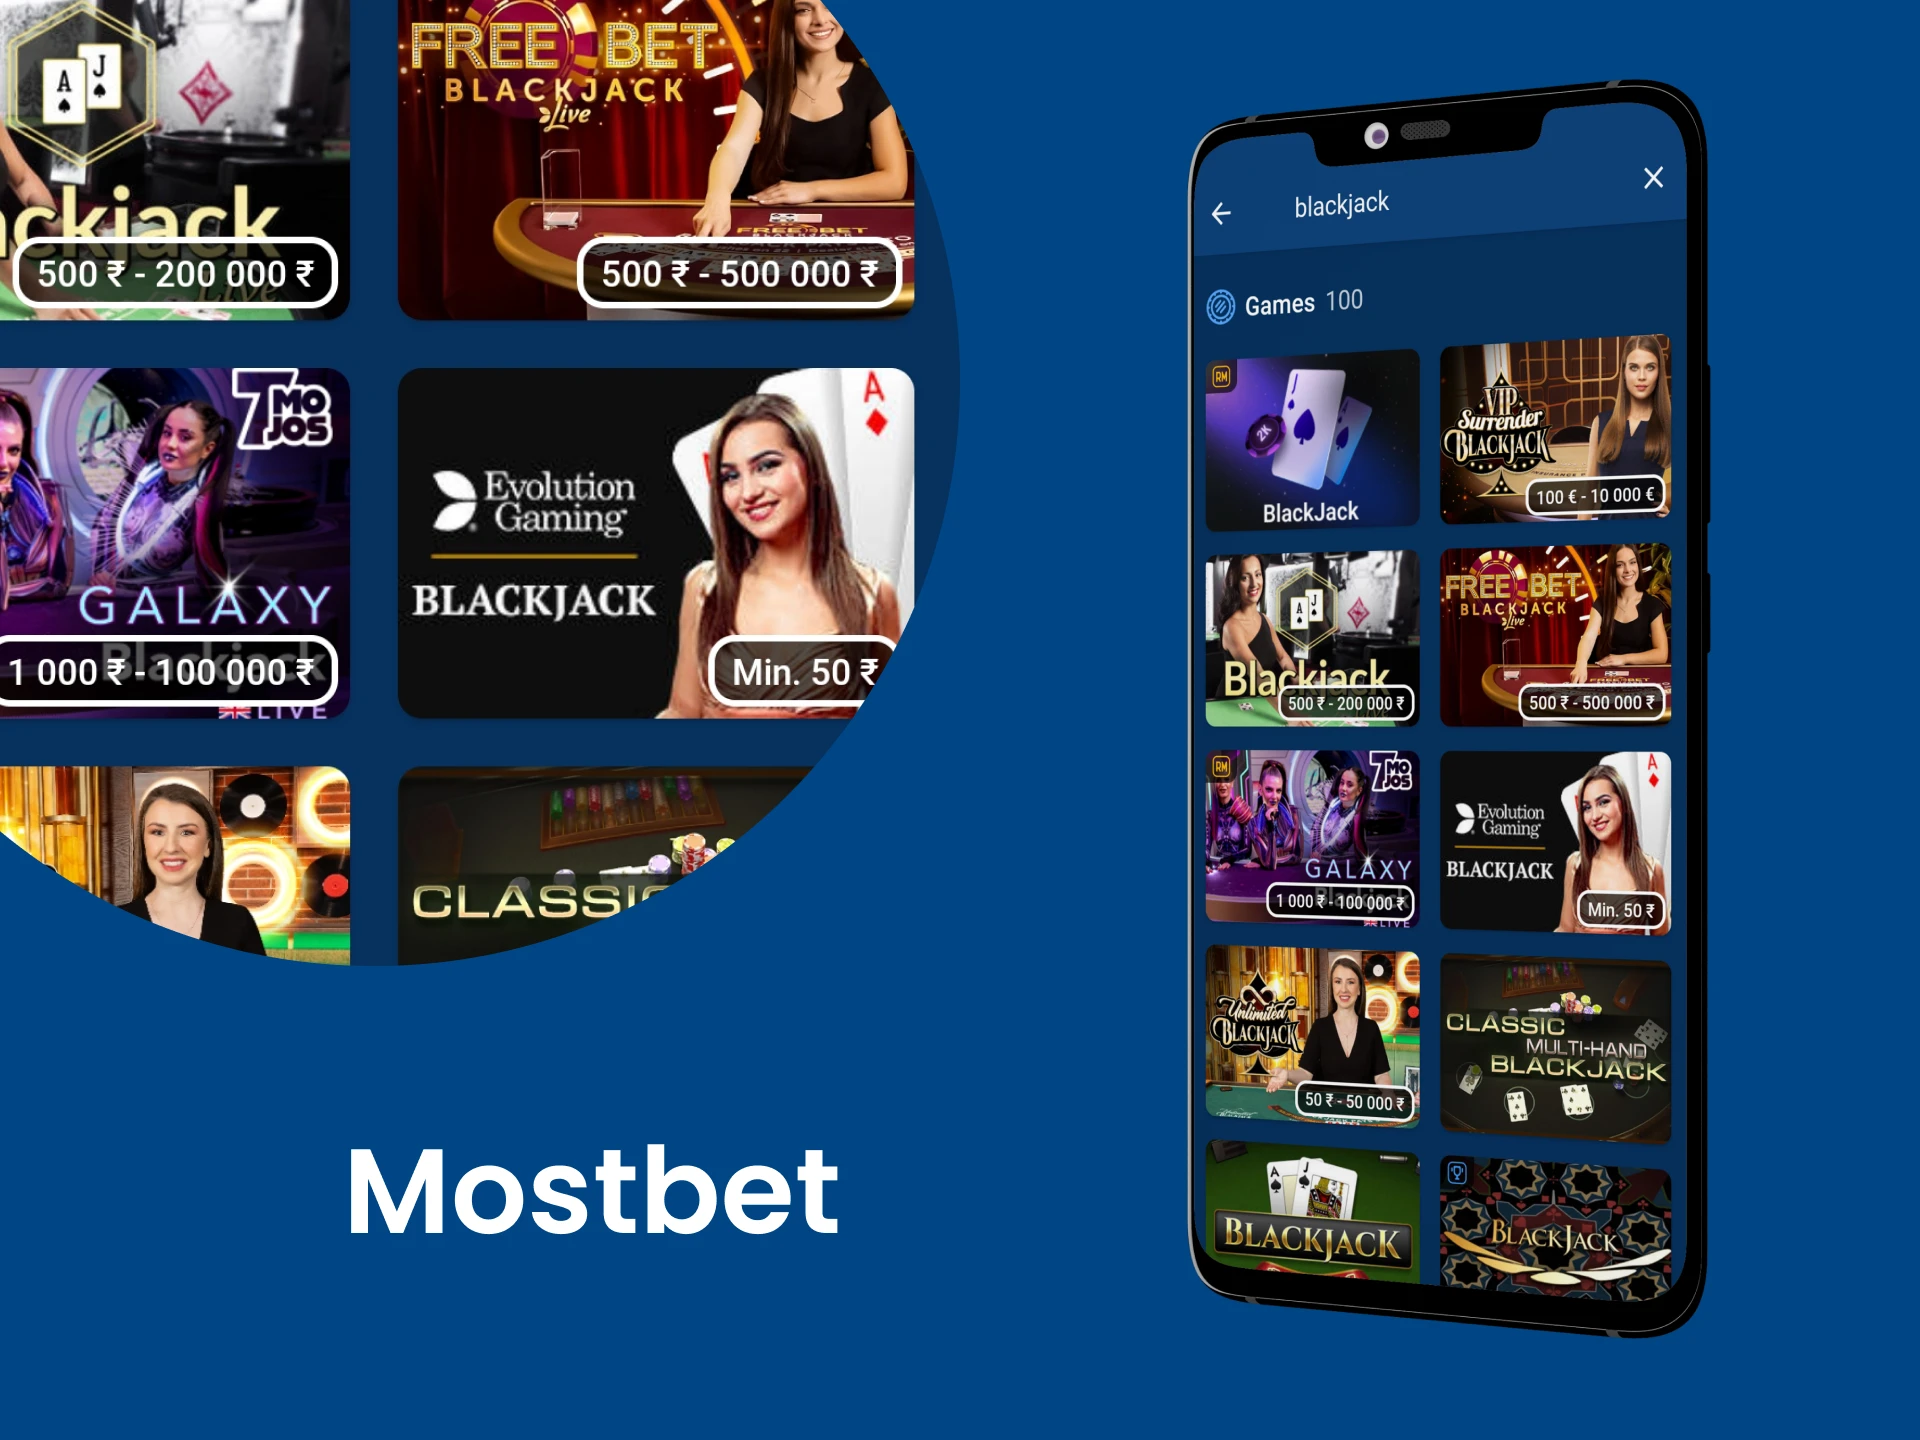 Download the Mostbet app to play Blackjack.